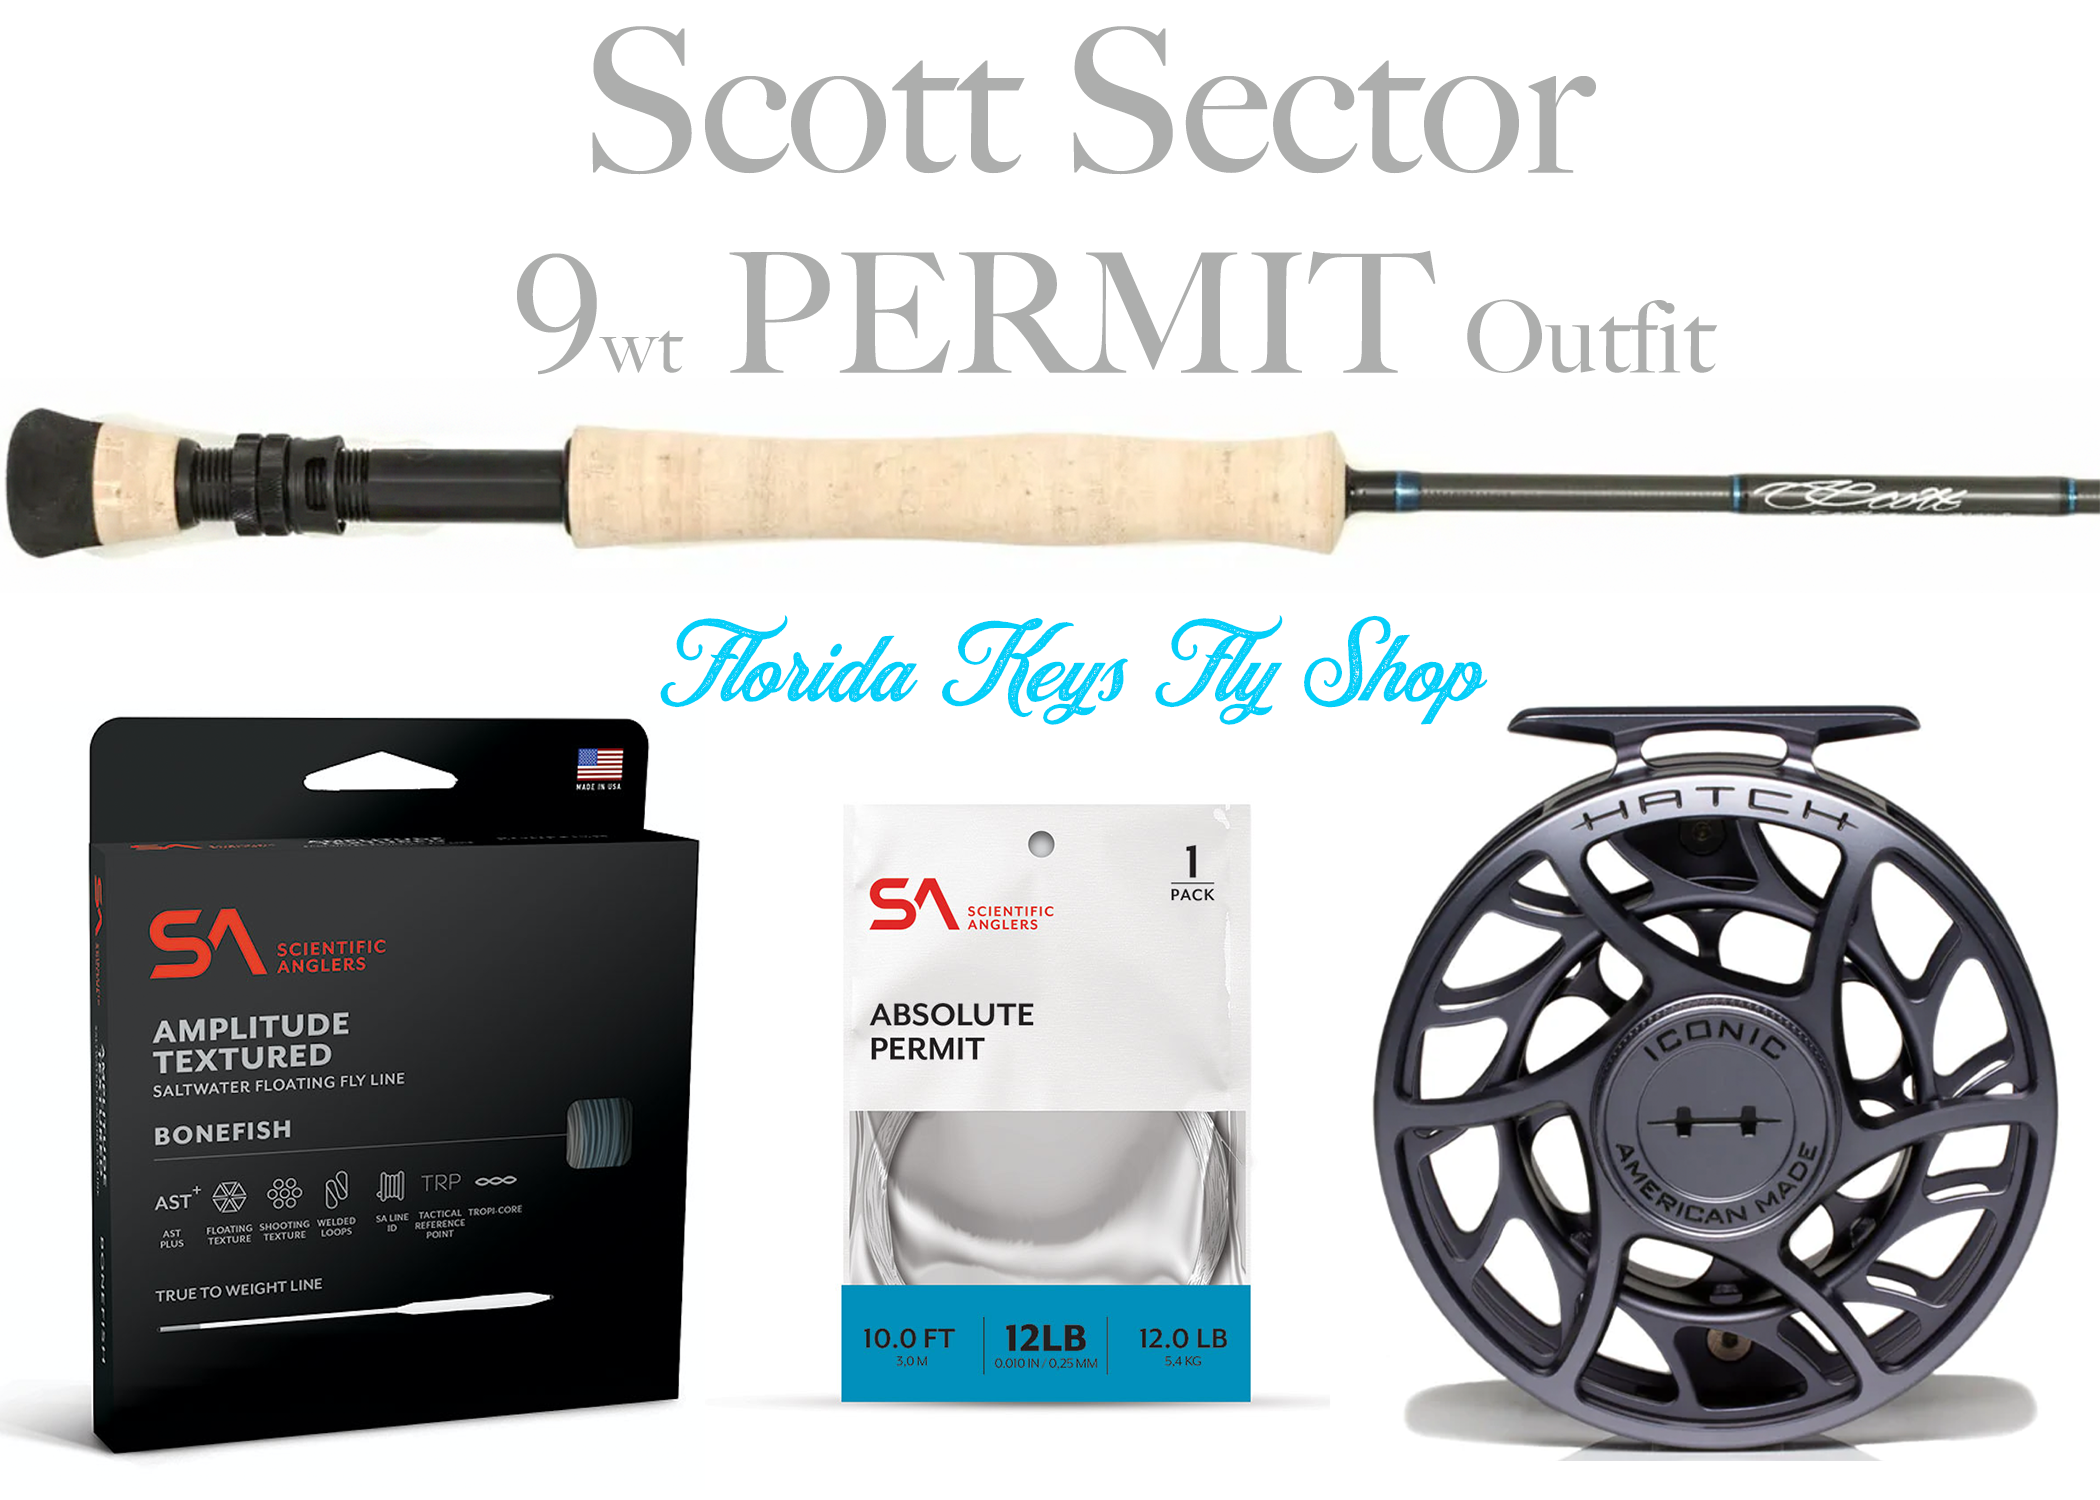 Scott Sector 11wt TARPON Combo Outfit - NEW!